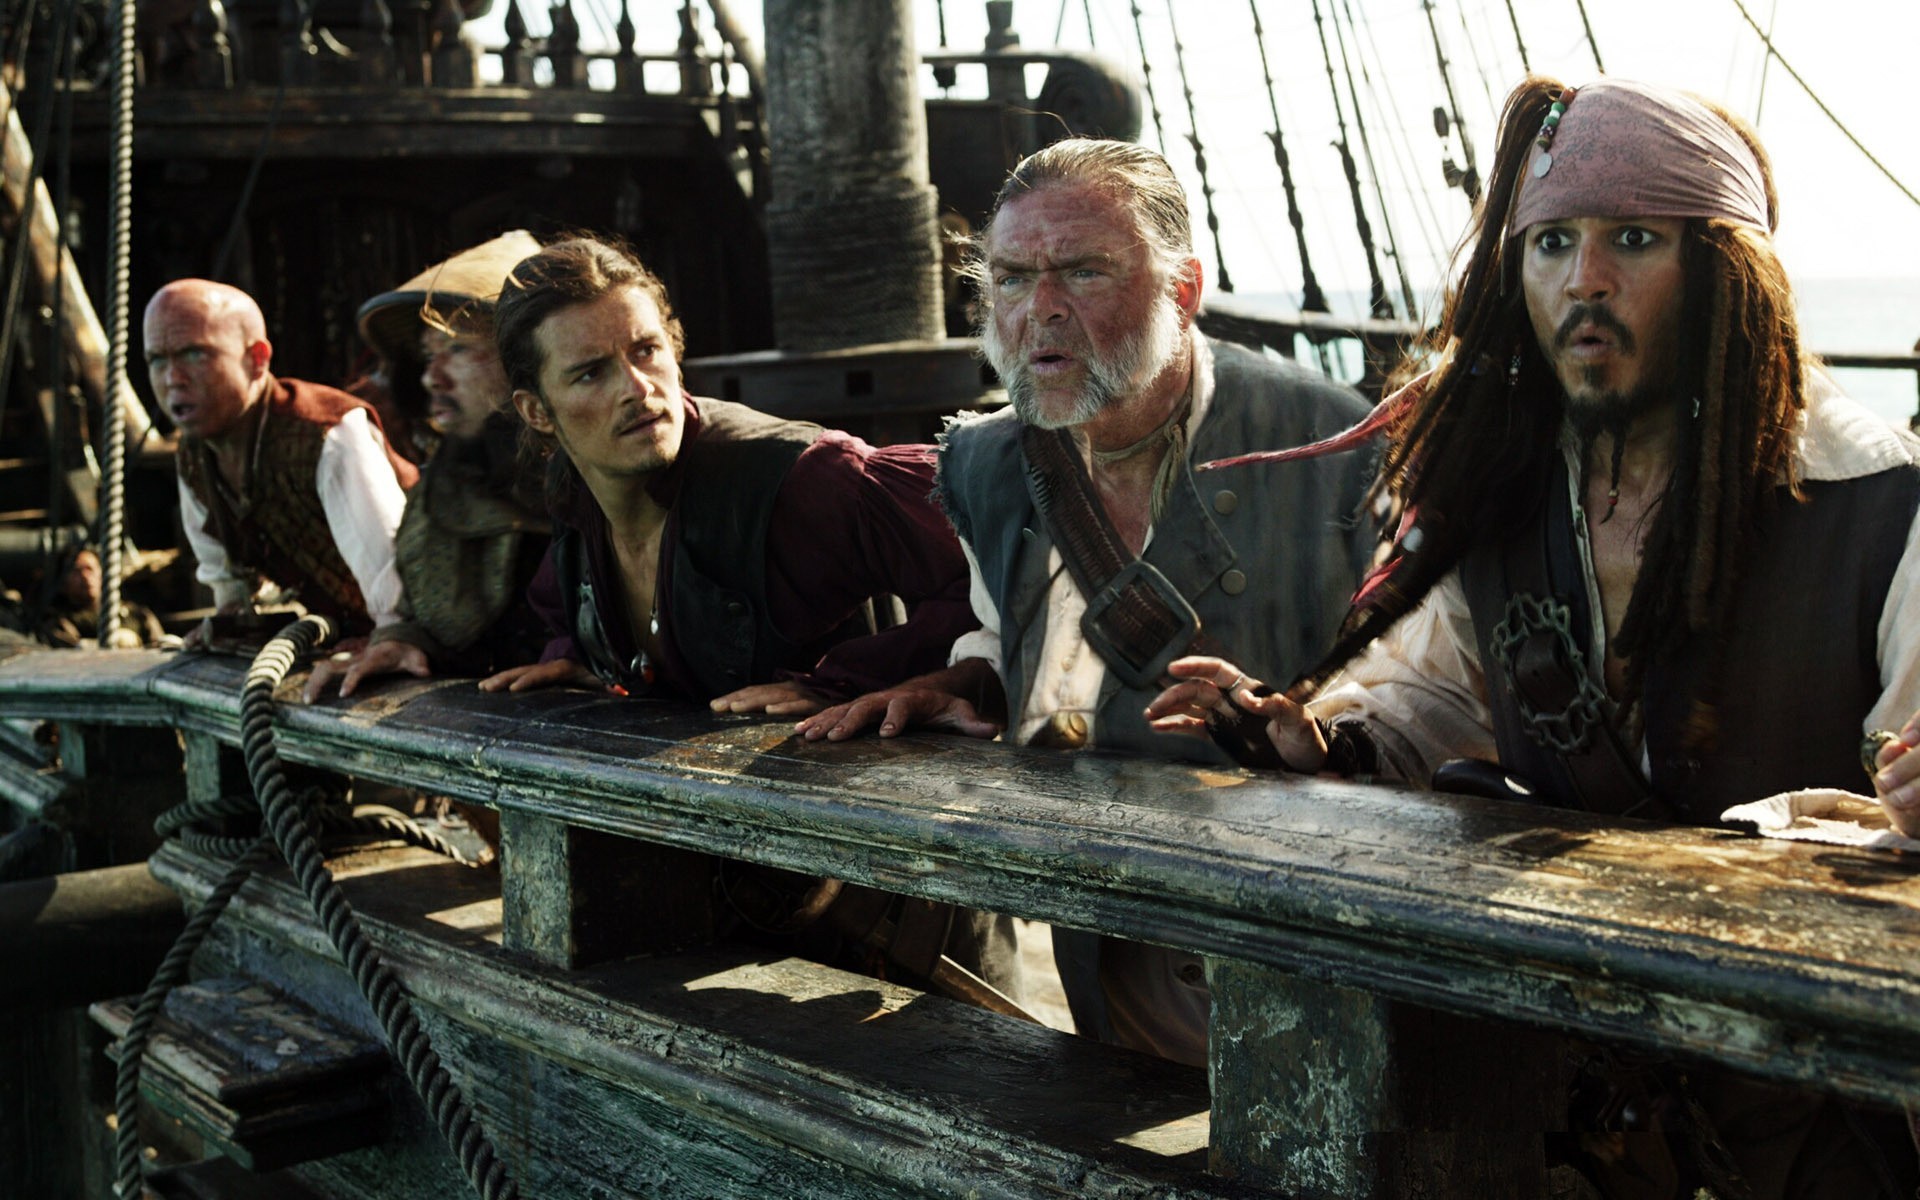 People 1920x1200 Pirates of the Caribbean Jack Sparrow Orlando Bloom movies Johnny Depp pirates Pirates of the Caribbean: At World's End men film stills